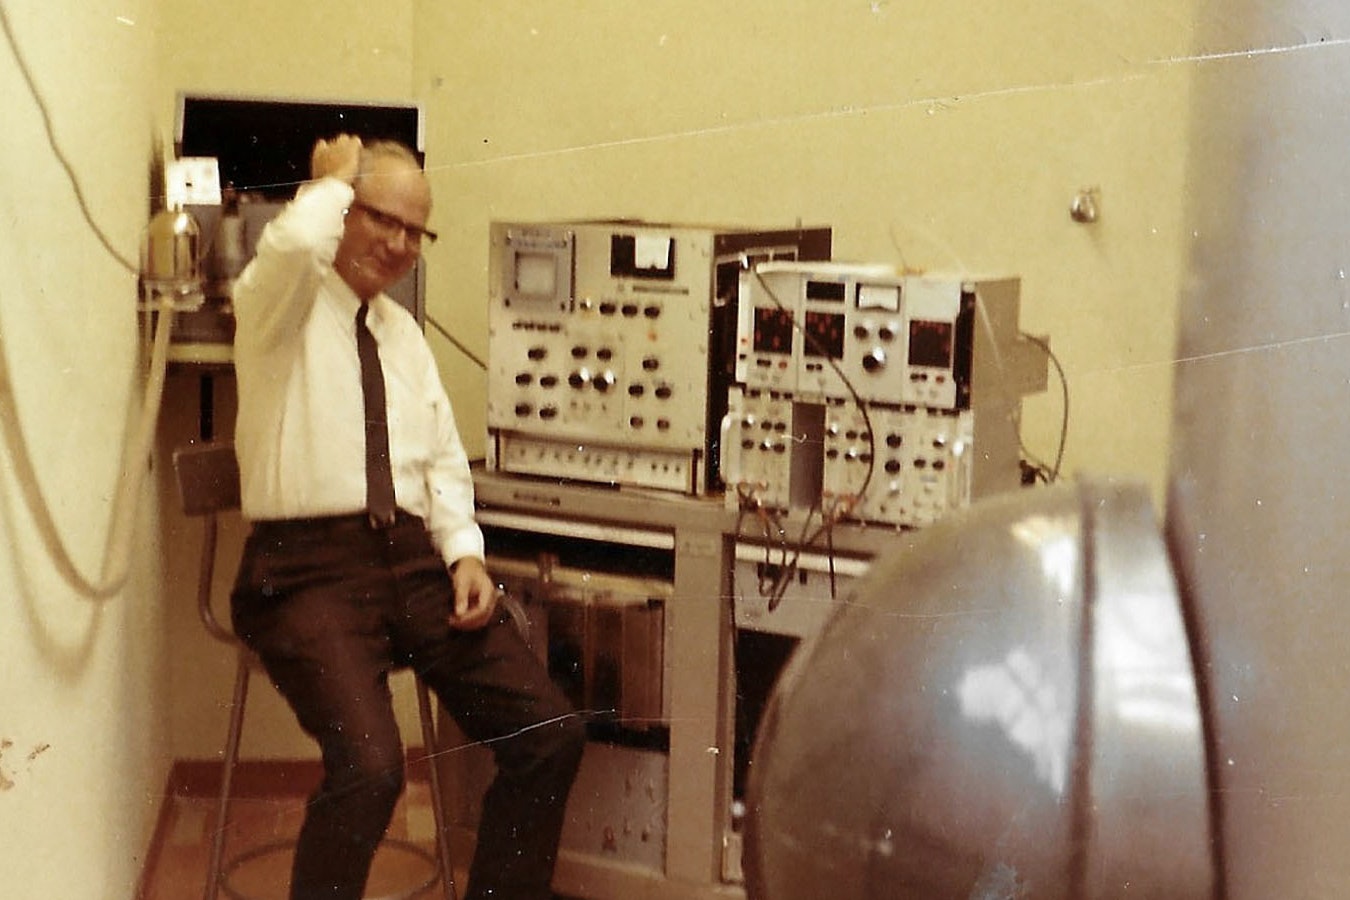 Dr. Victor Ryan in the small control room of the tiny nuclear reactor he brought to the University of Wyoming and was kept in the basement of the old engineering building.